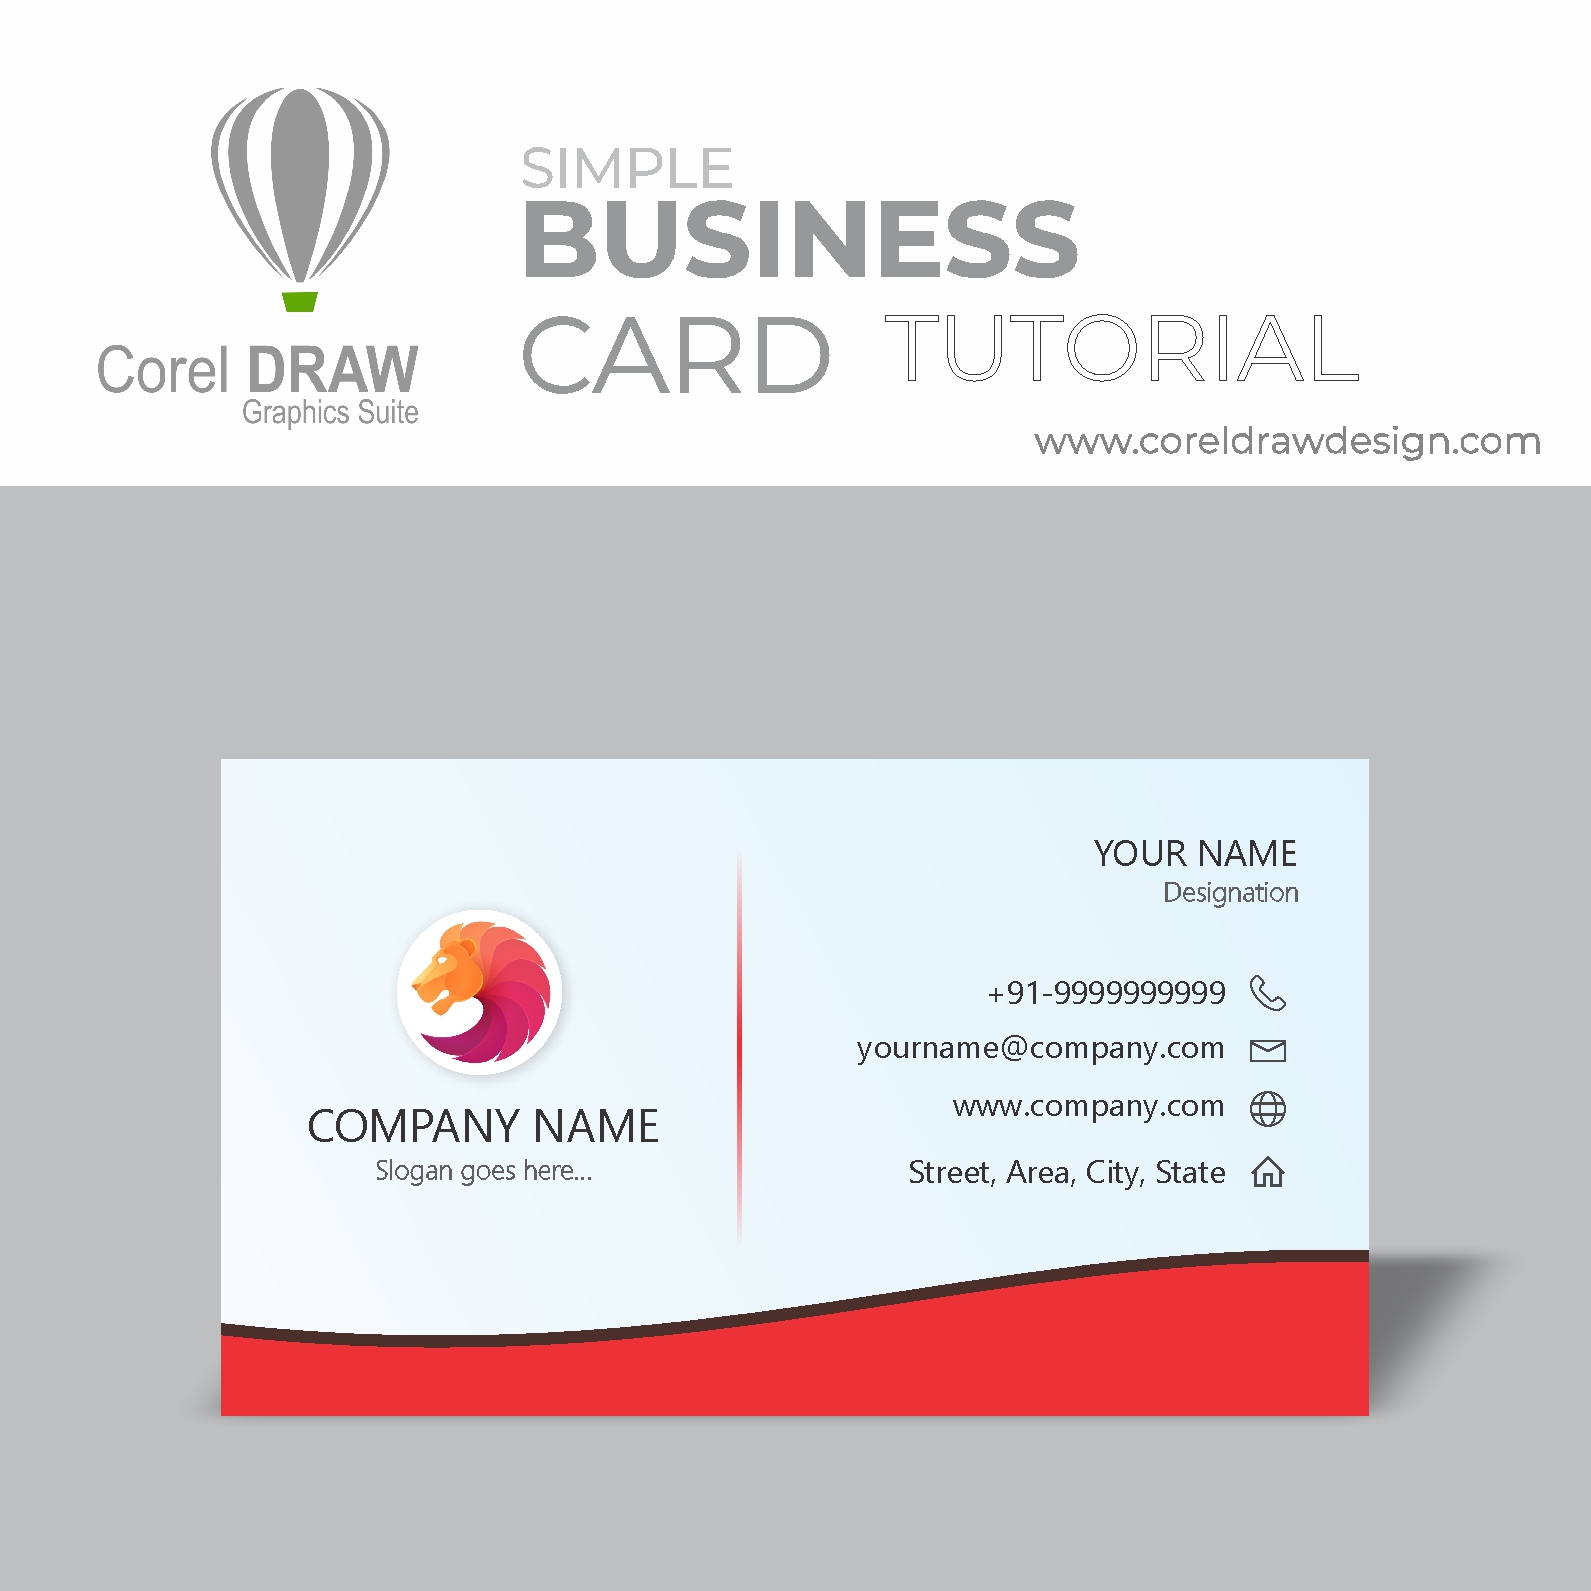 Basic Business Card Design for Beginners in CorelDraw